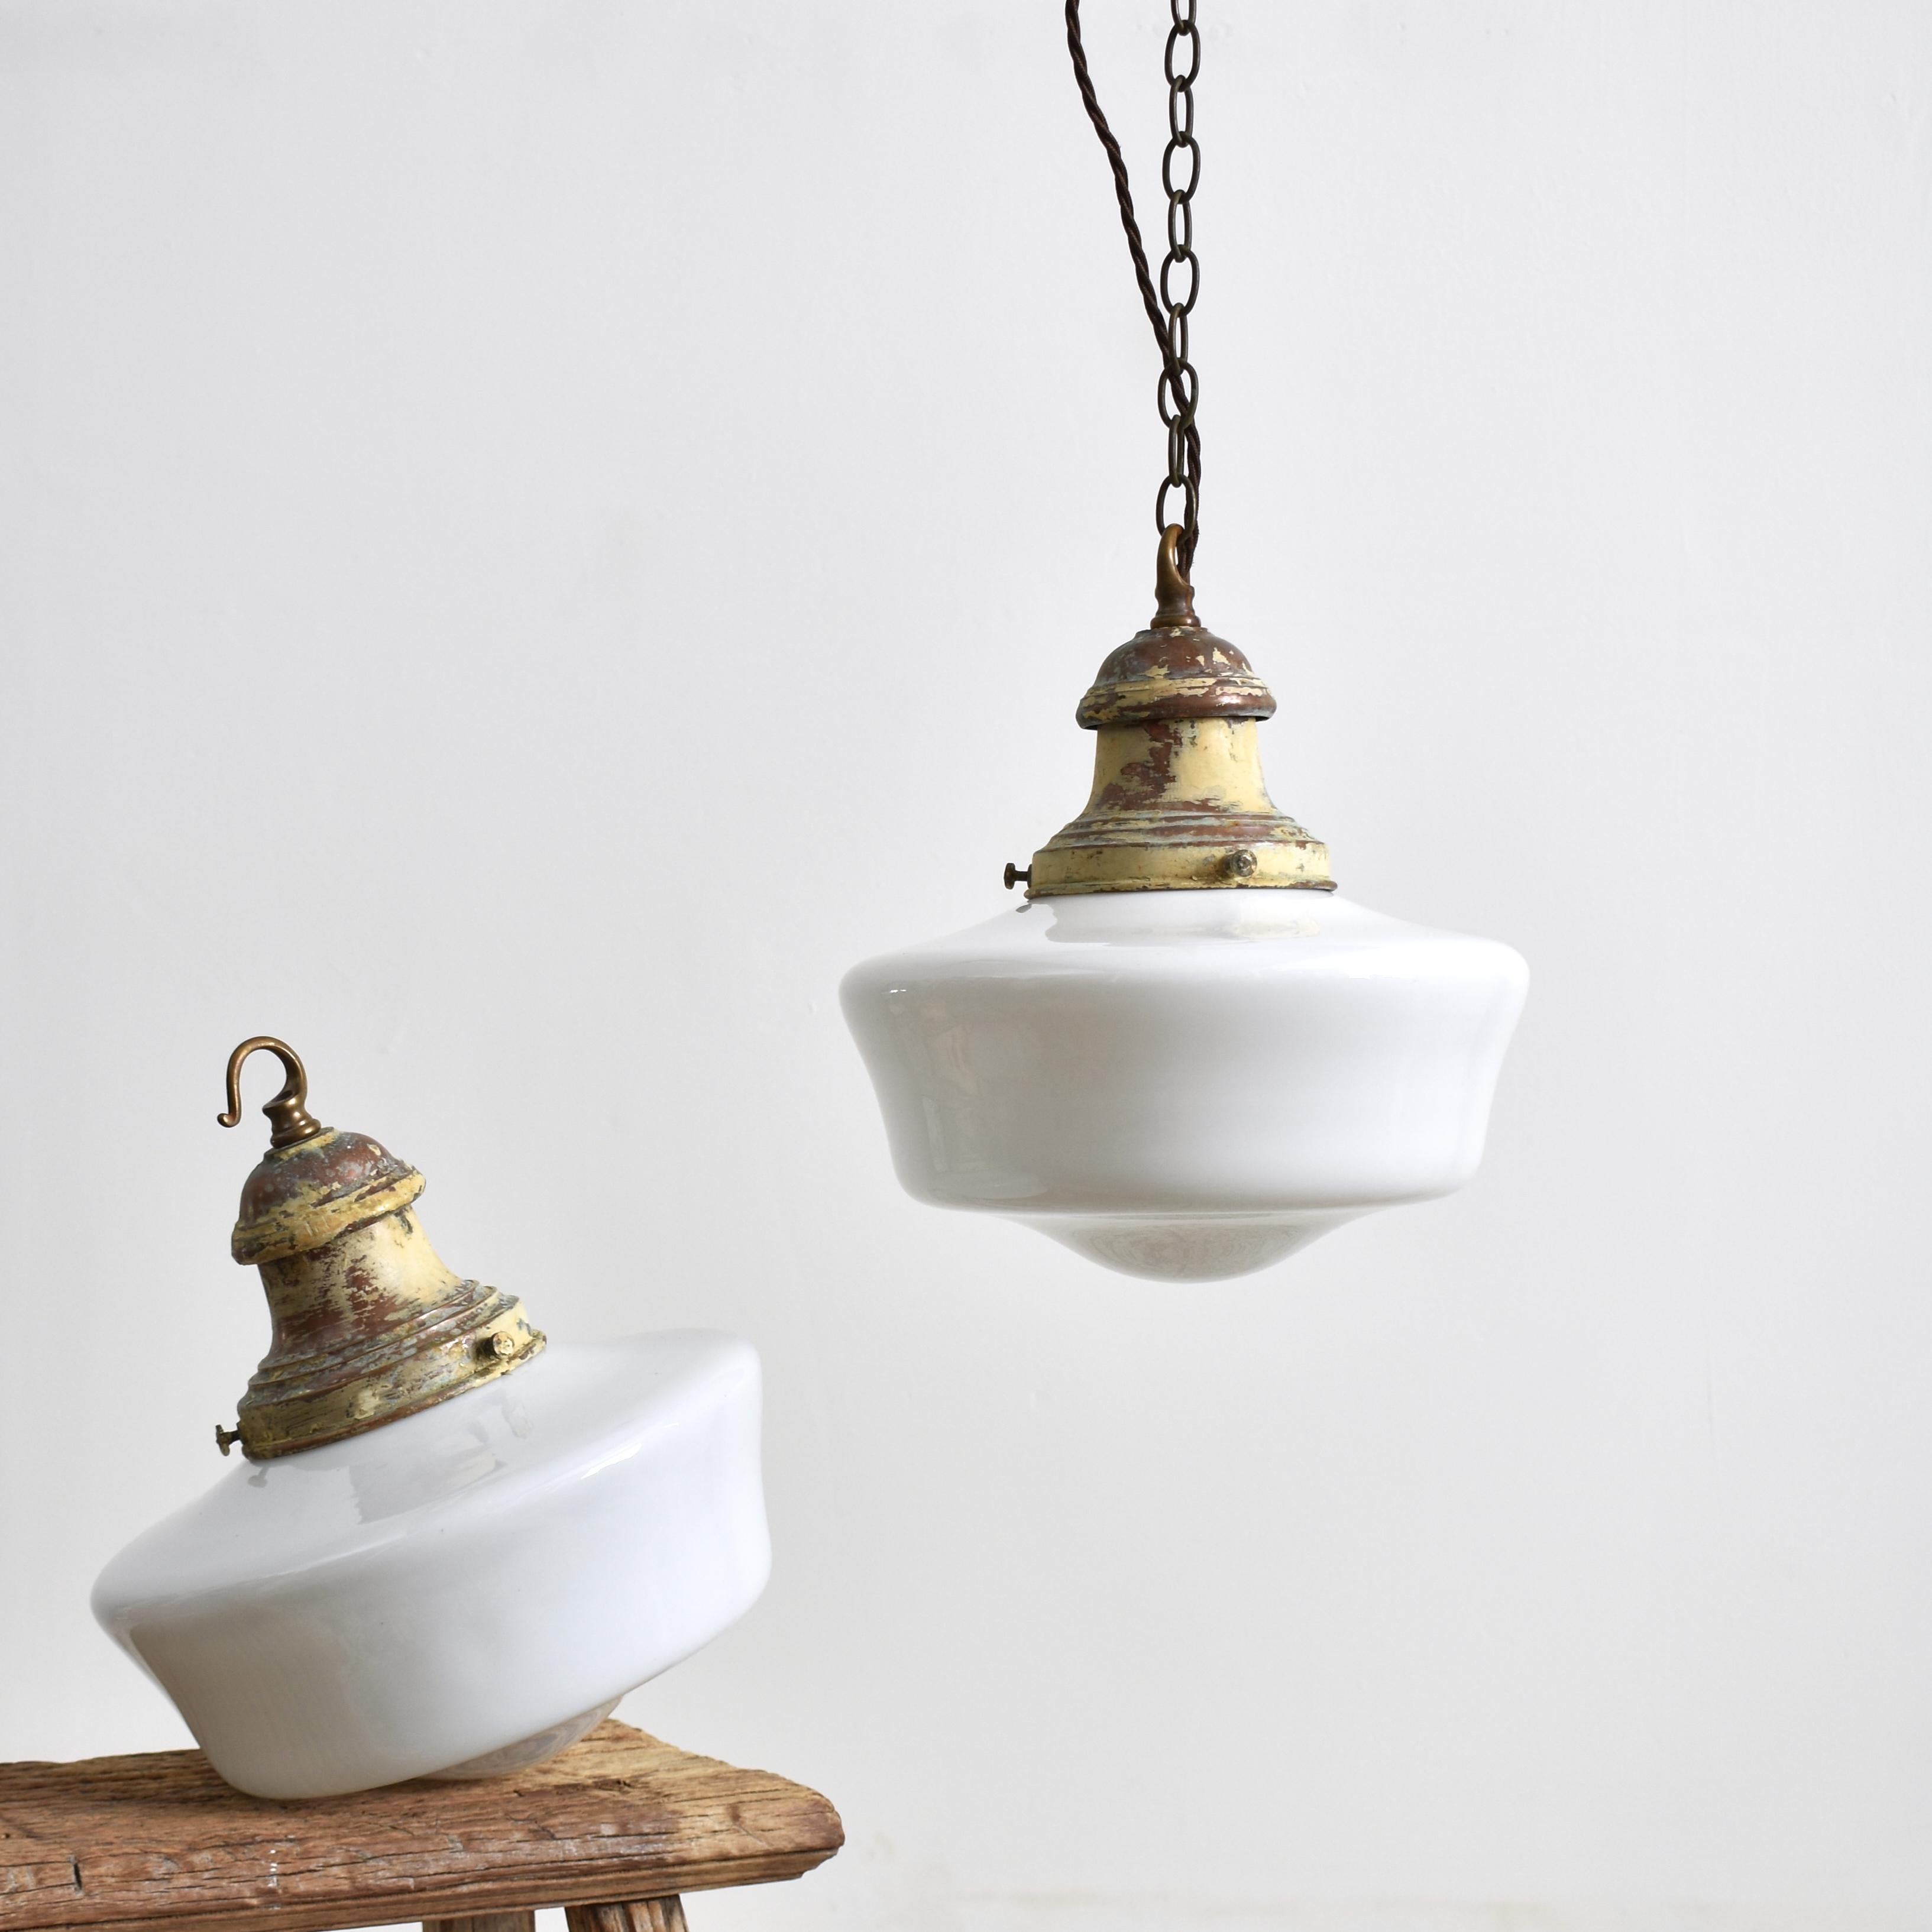 Pair of Antique Church Opaline Pendant Lights In Good Condition For Sale In Stockbridge, GB